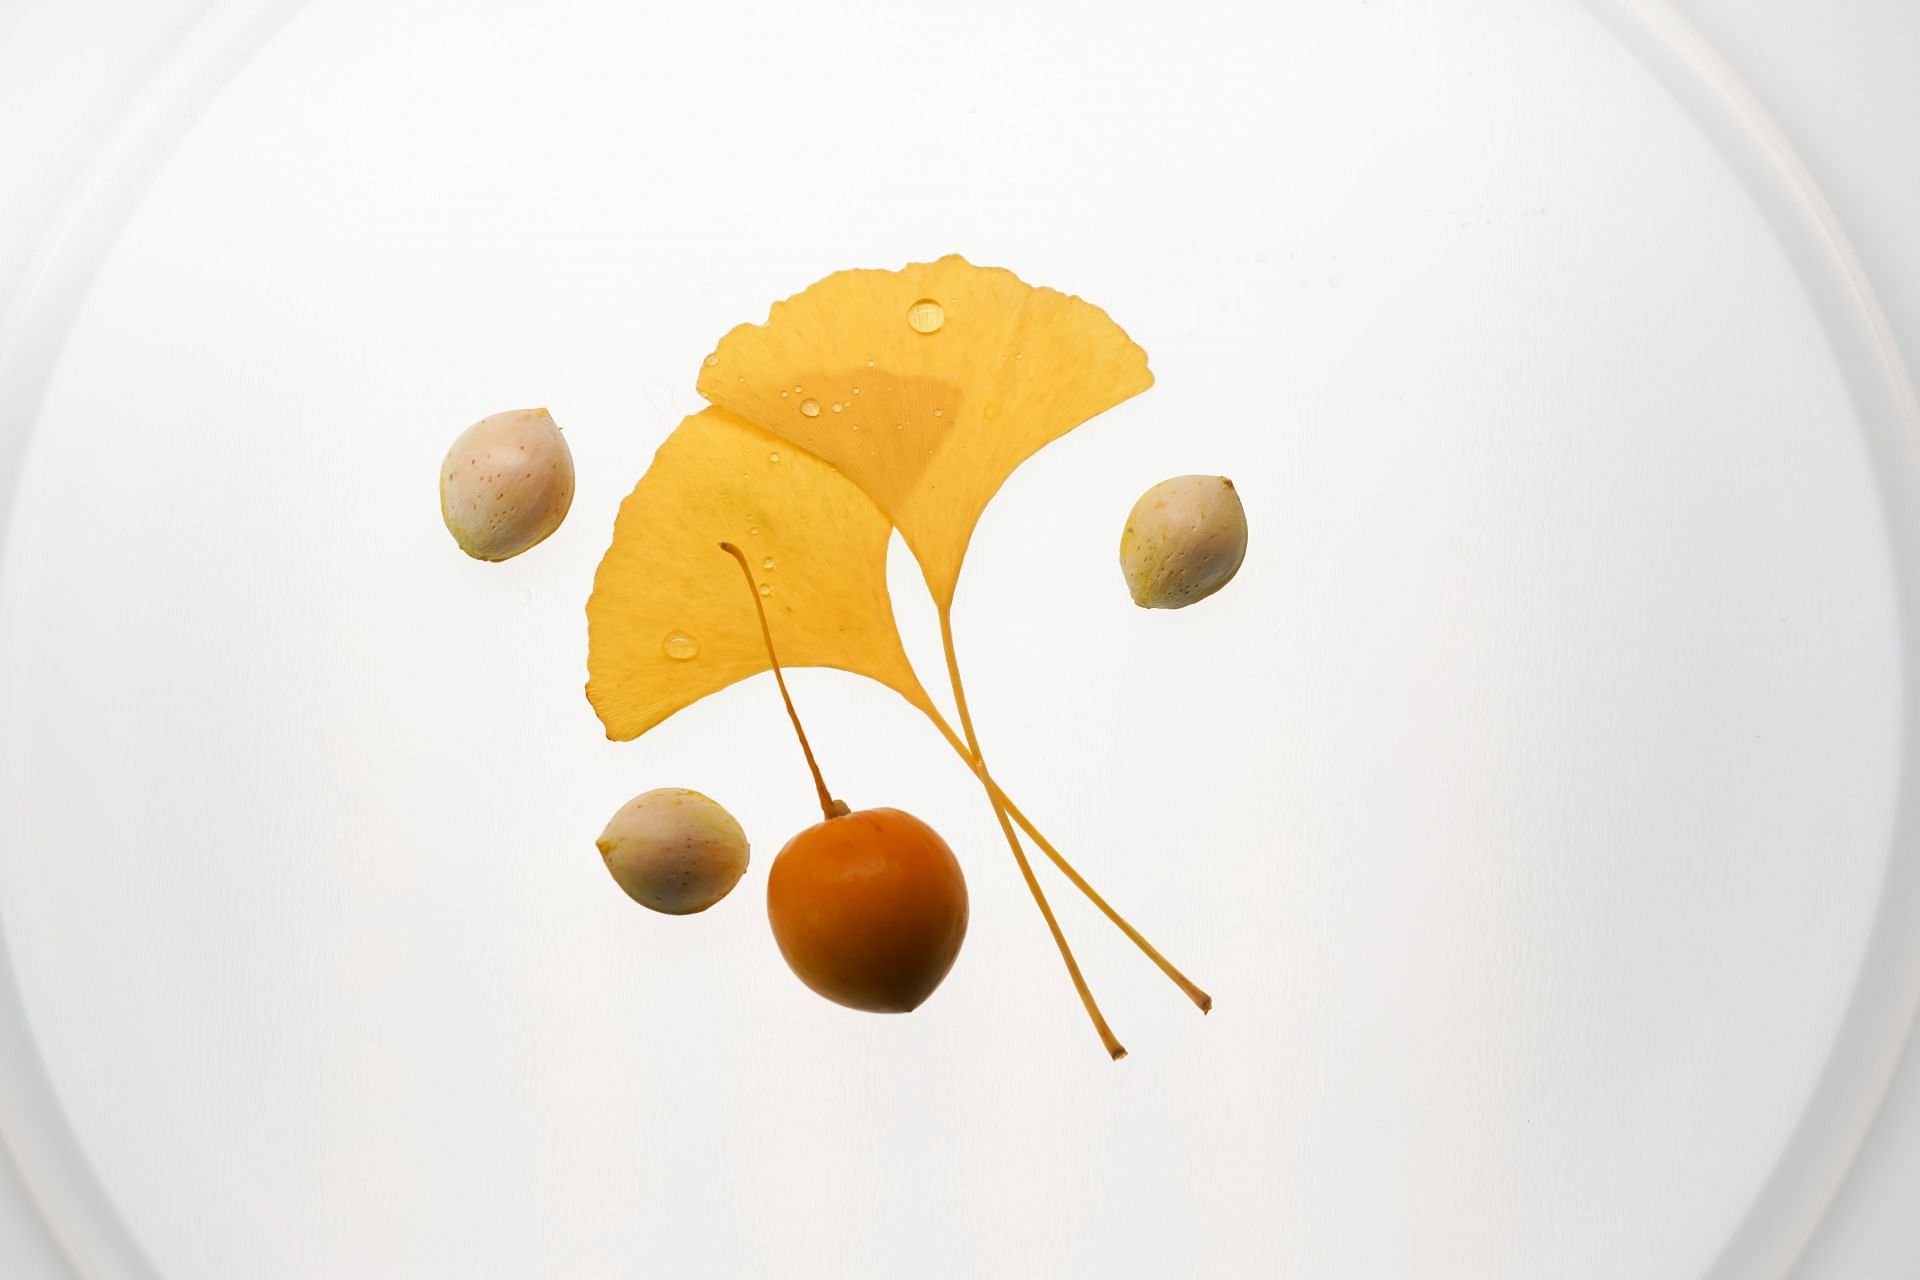 Ginkgo might not be safe for pregnant women. (Image via Unsplash/Olga Drach)